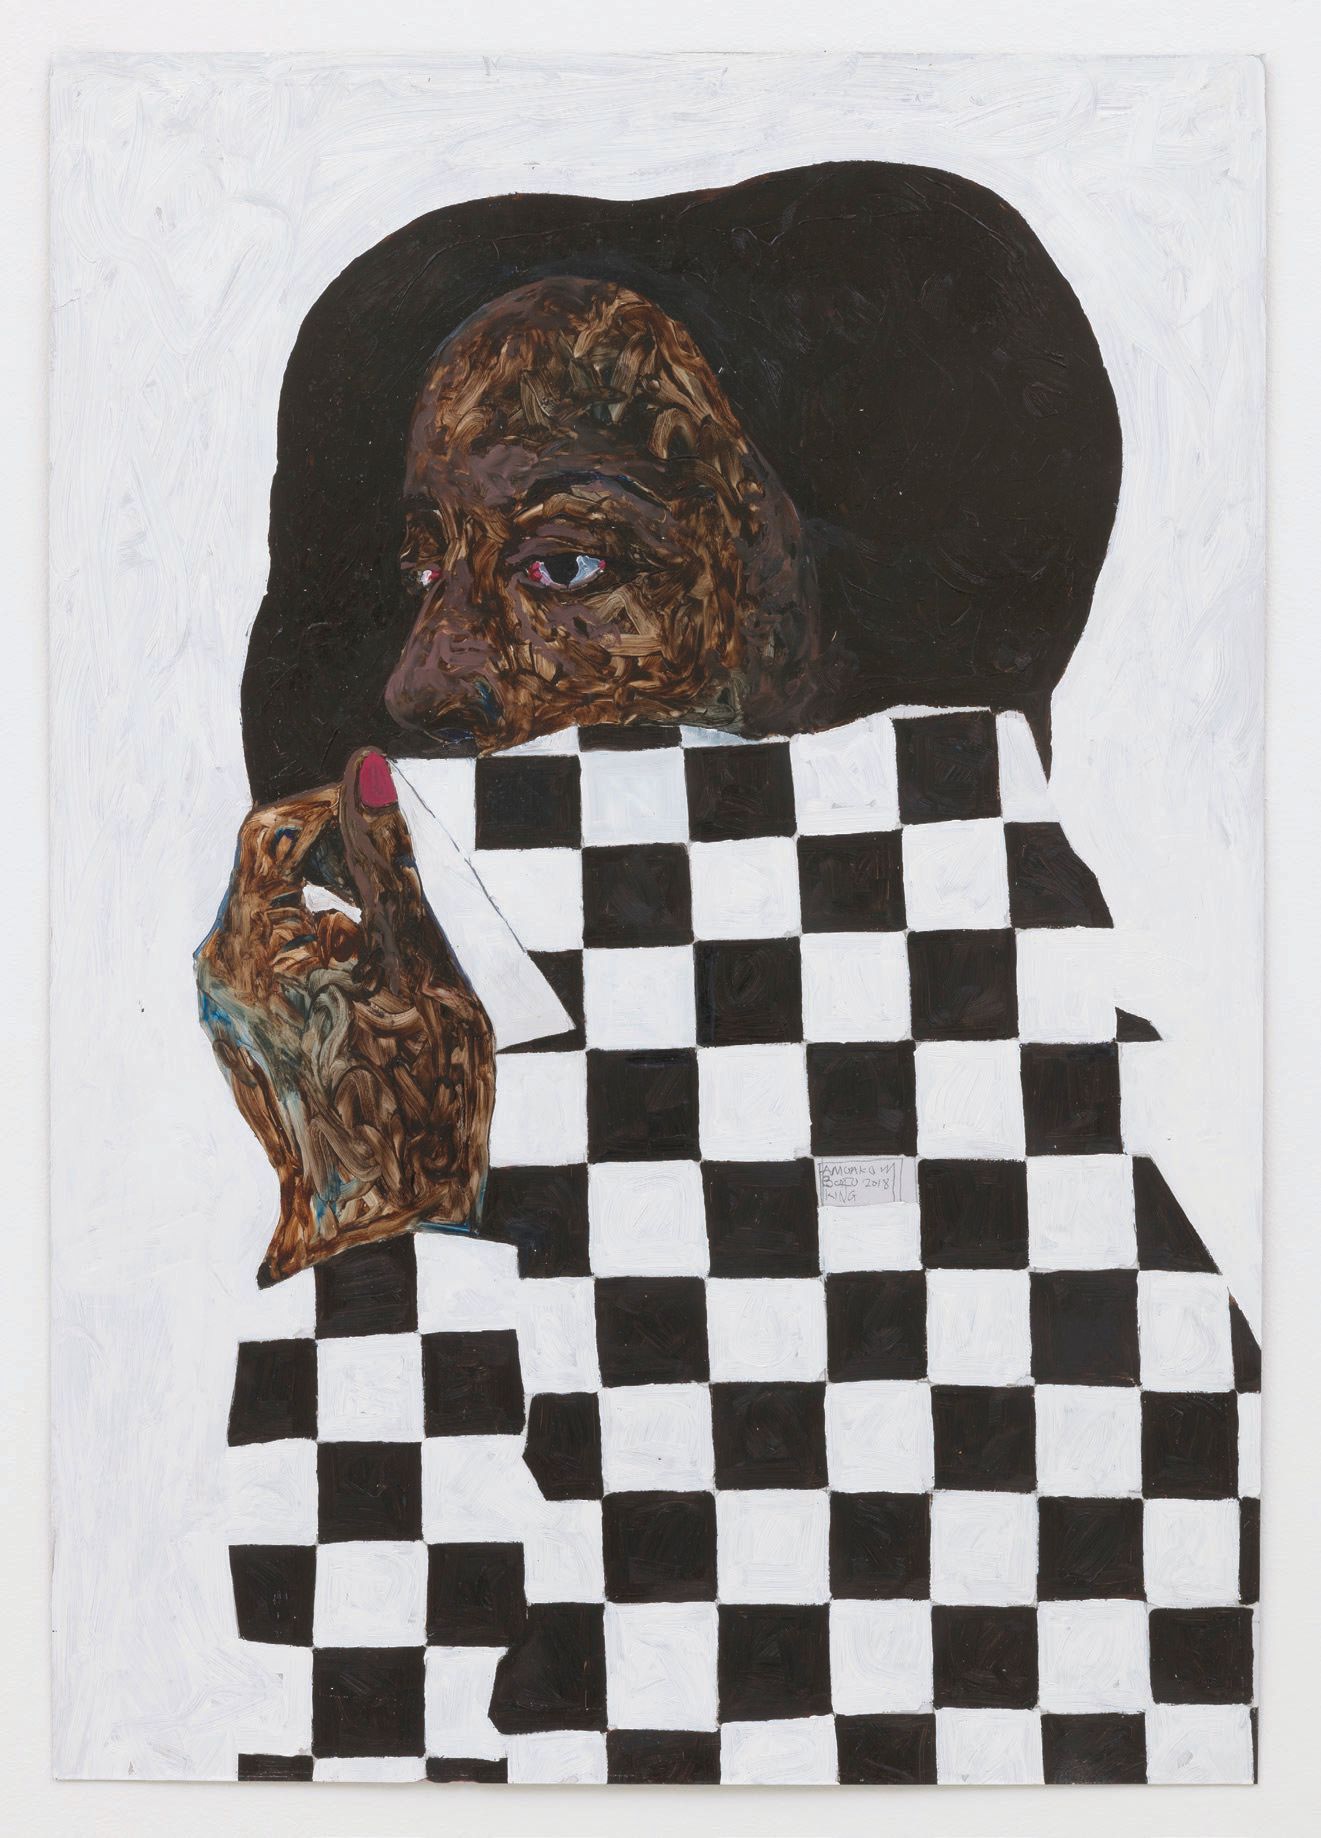 Amoako Boafo, "Black and White" (2018). Both works on view through February 27, 2022 as part of 'Amoako Boafo - Soul of Black Folks' at the Museum of the African Diaspora in San Franciso. PHOTO COURTESY OF AMOAKO BOAFO AND ROBERTS PROJECTS, CULVER CITY